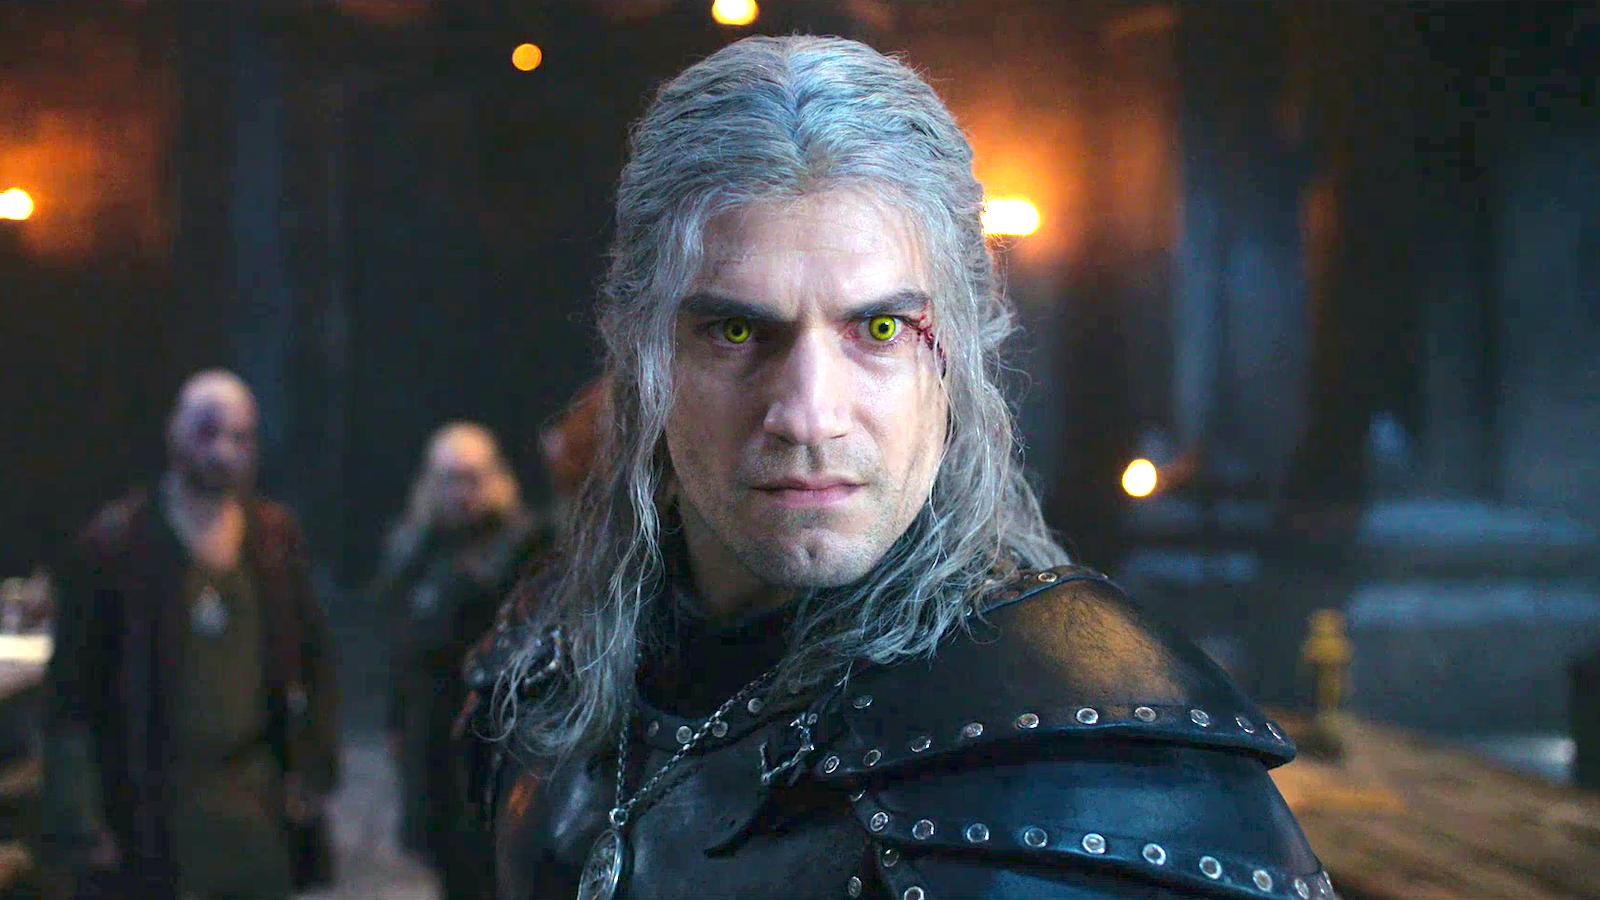 ‘The Witcher’ spinoff star compares Geralt of Rivia’s recasting to ‘Doctor Who’